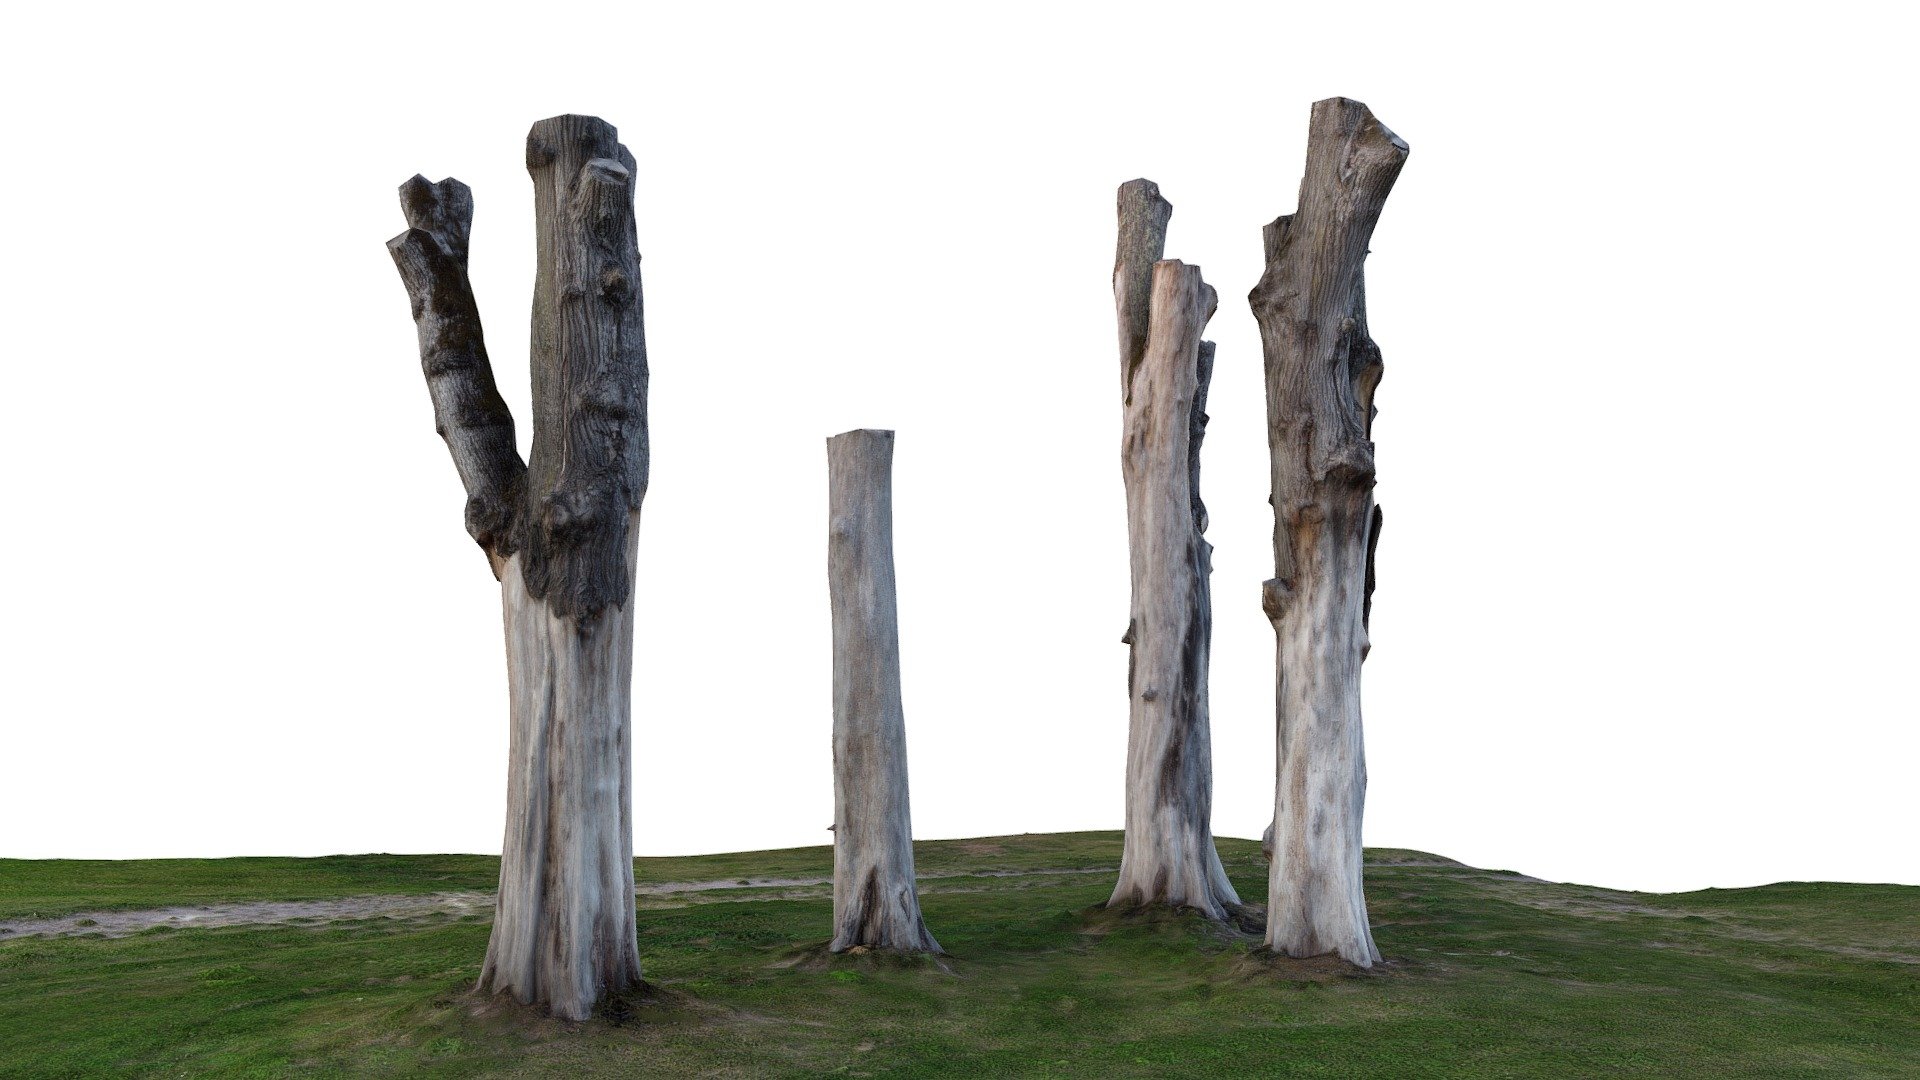 This is a group of elm trees that were cut down due to illness. You can find them in Åtvidaberg, Sweden.
780 photos x 8 textures

The group of trees stand in front of a building called &ldquo;Ålundamagasinet